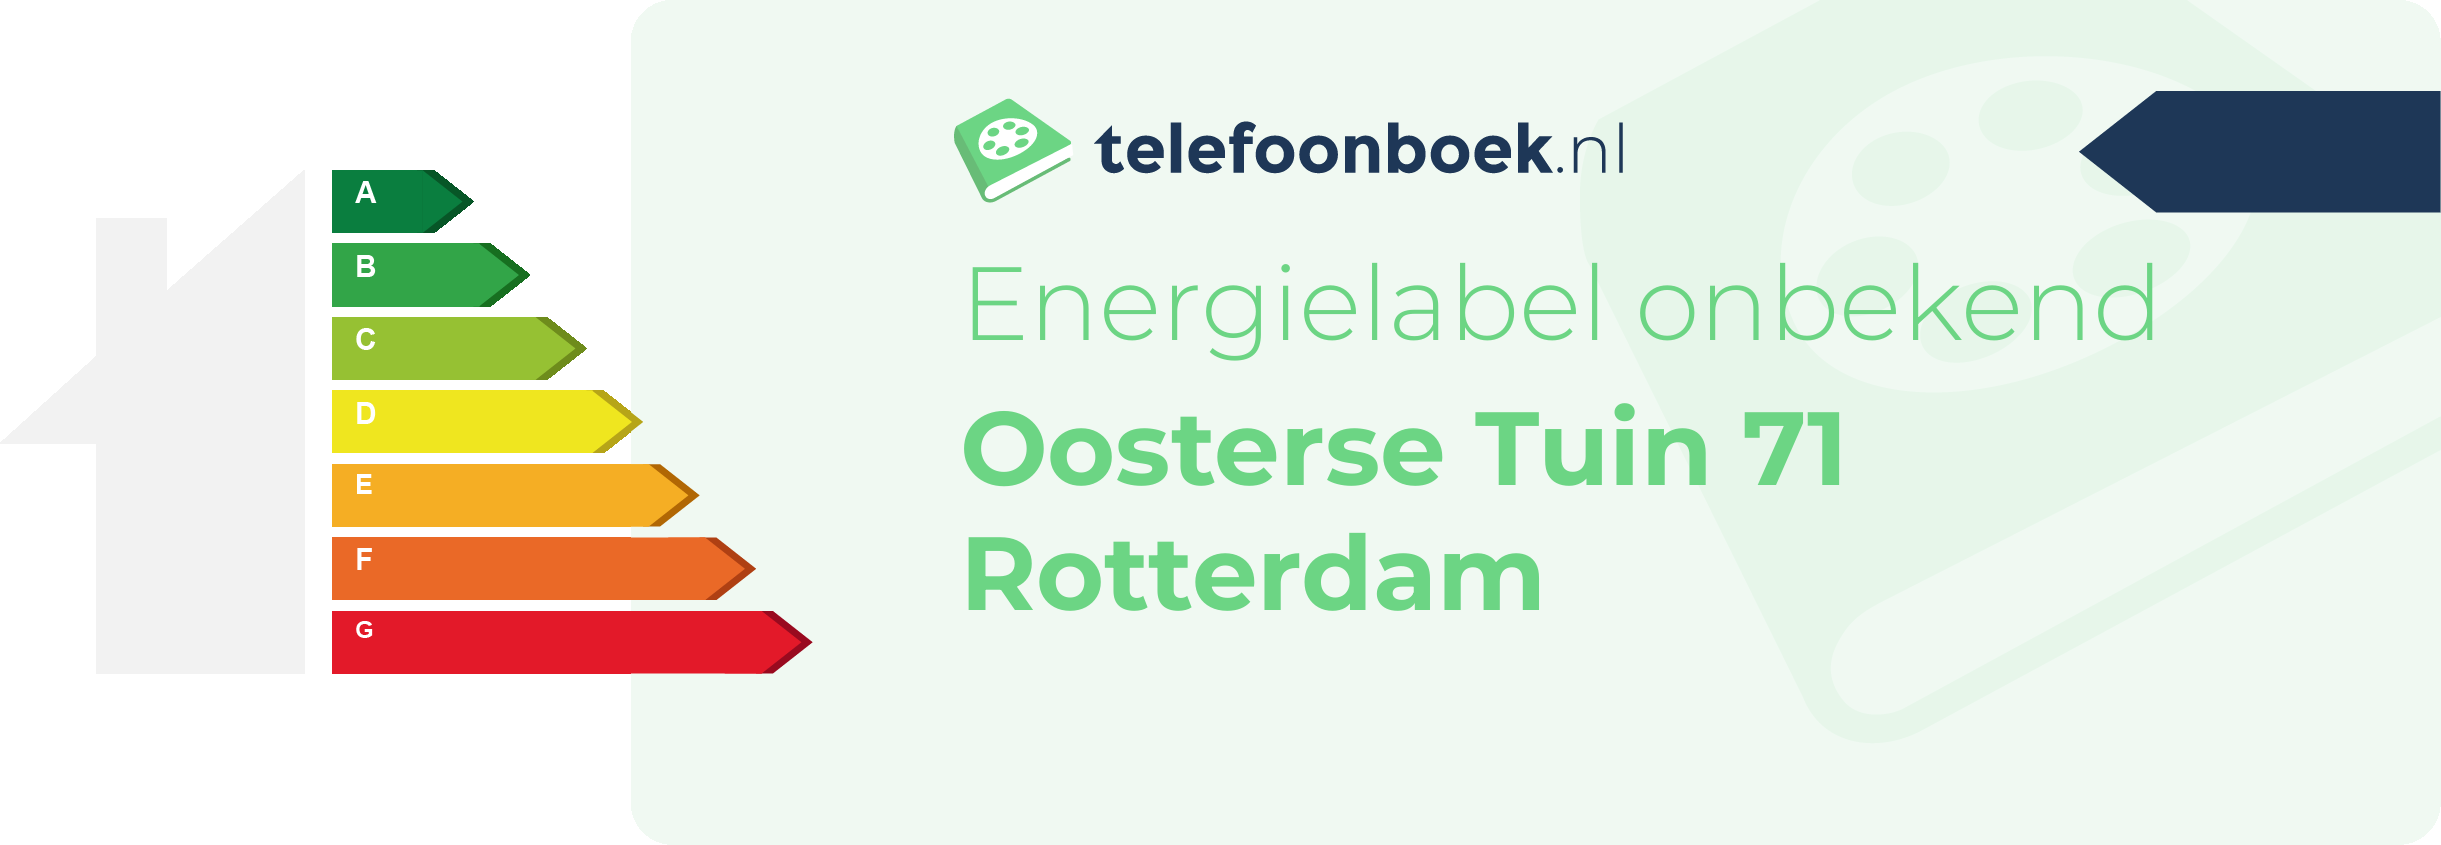 Energielabel Oosterse Tuin 71 Rotterdam